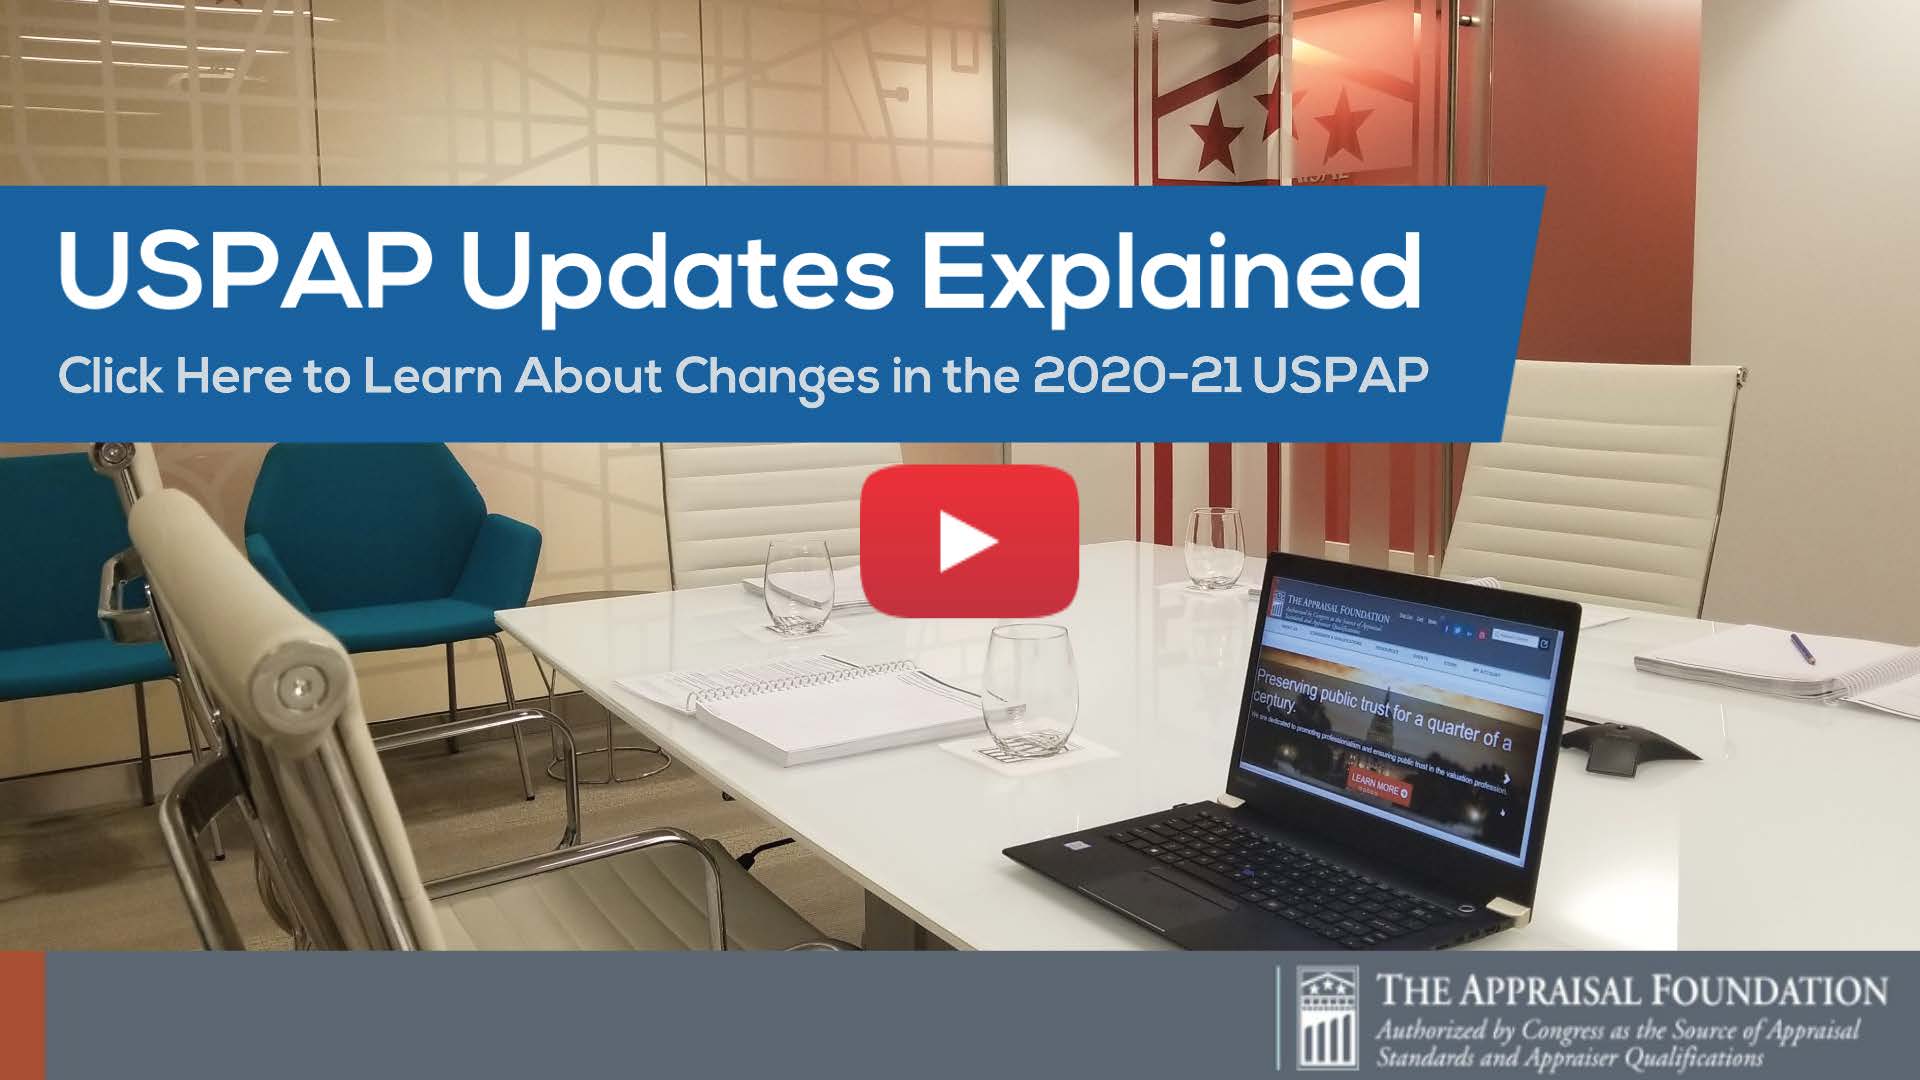 USPAP Updates Explained Video Link button